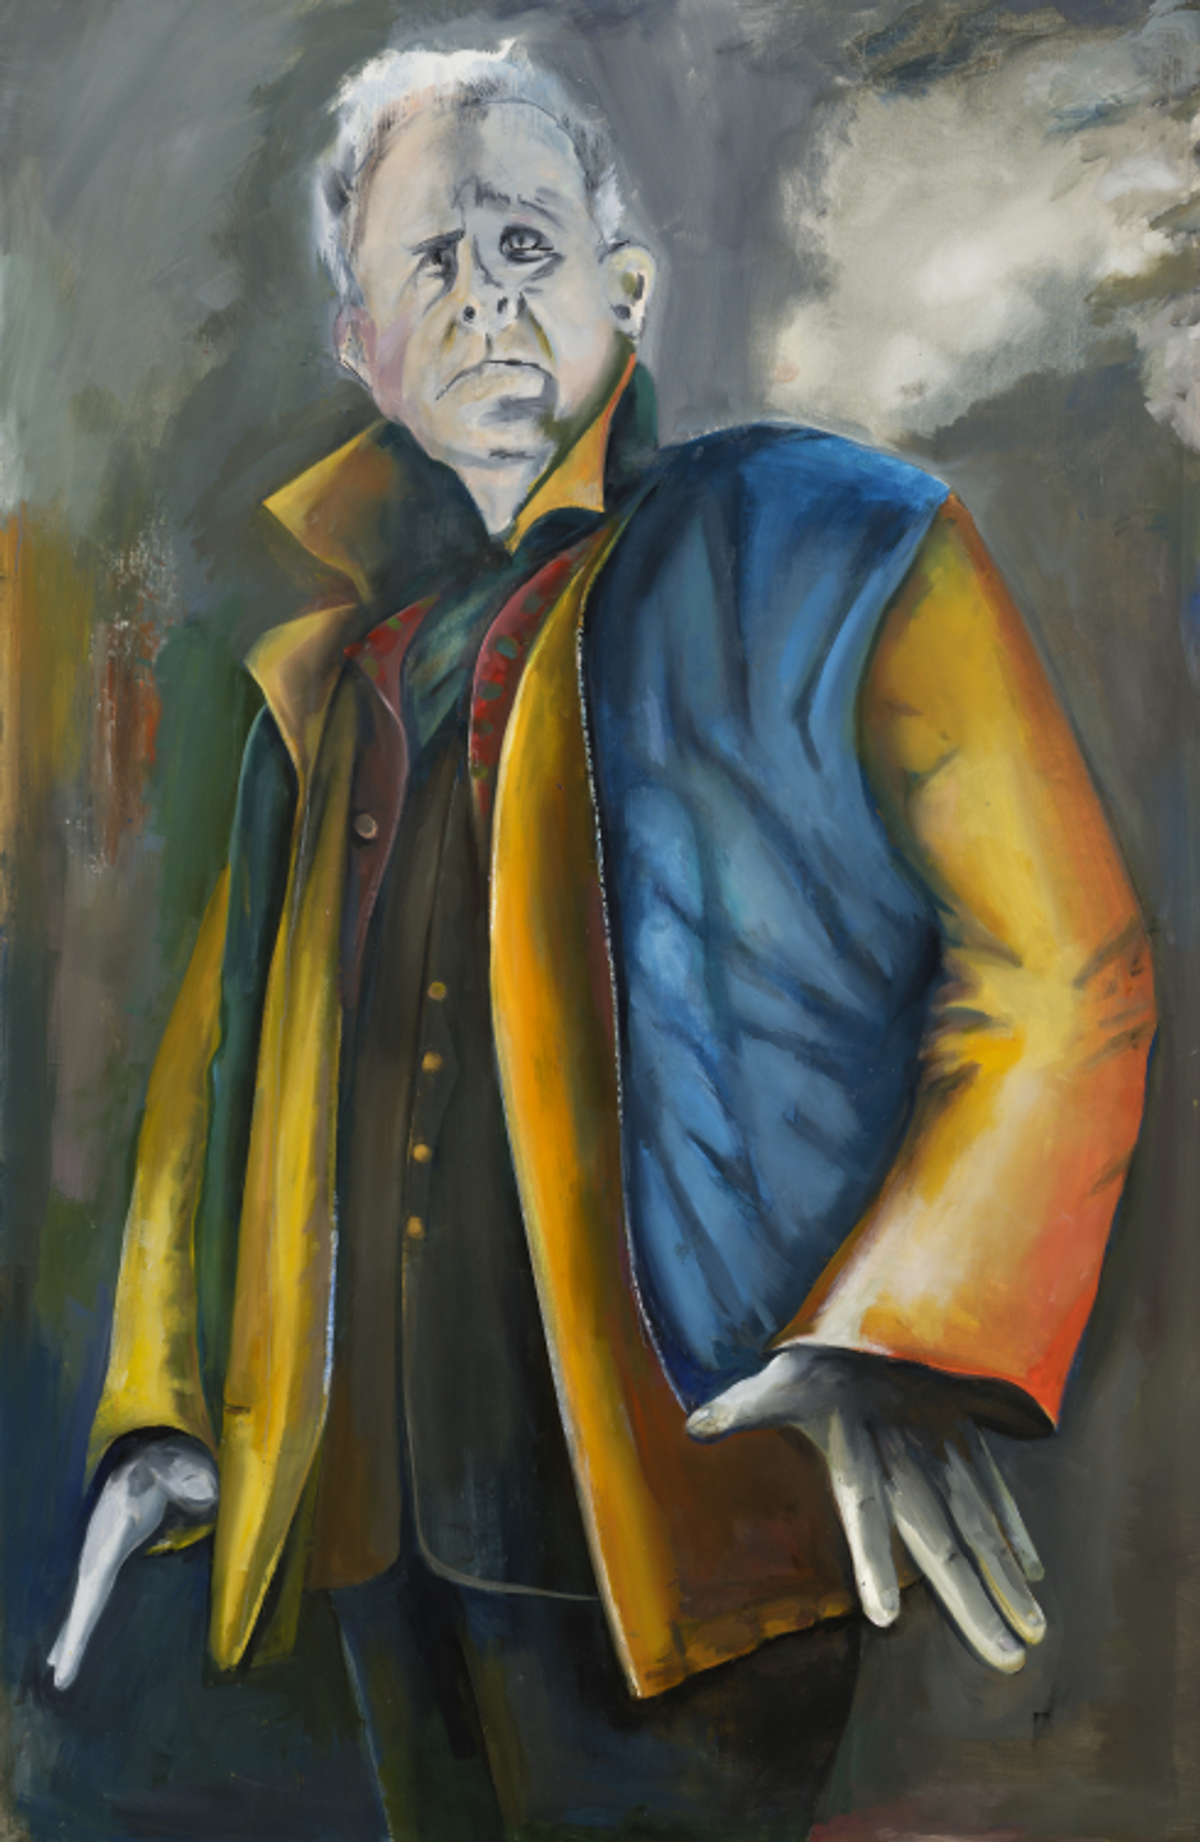 Martial Raysse Courage Martiel, 2021. Musée Paul valéry, G. Hutchinson